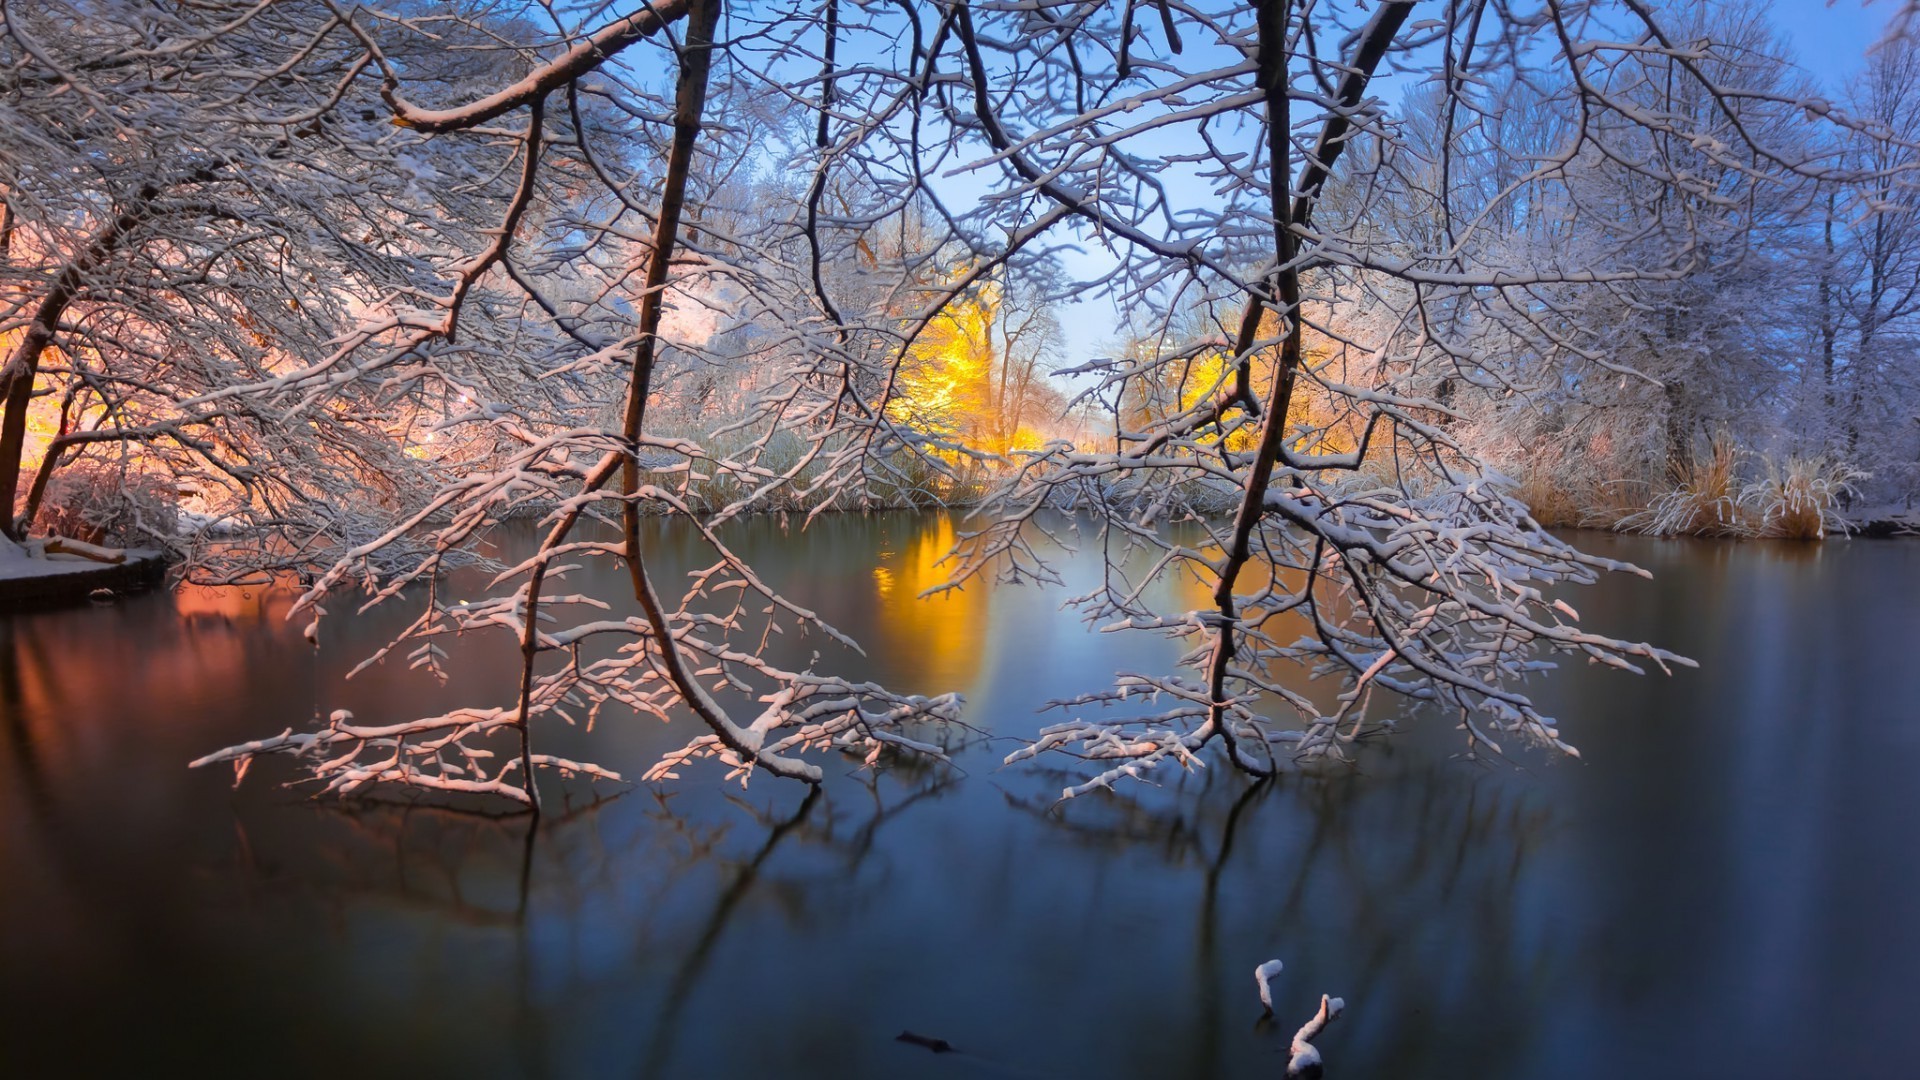 1920x1080 nature, Landscape, Water, Lake, Trees, Brooklyn, Park, New York City, USA,  Sunrise, Winter, Snow, Branch, Reflection, Morning, Long Exposure Wallpapers  HD ...